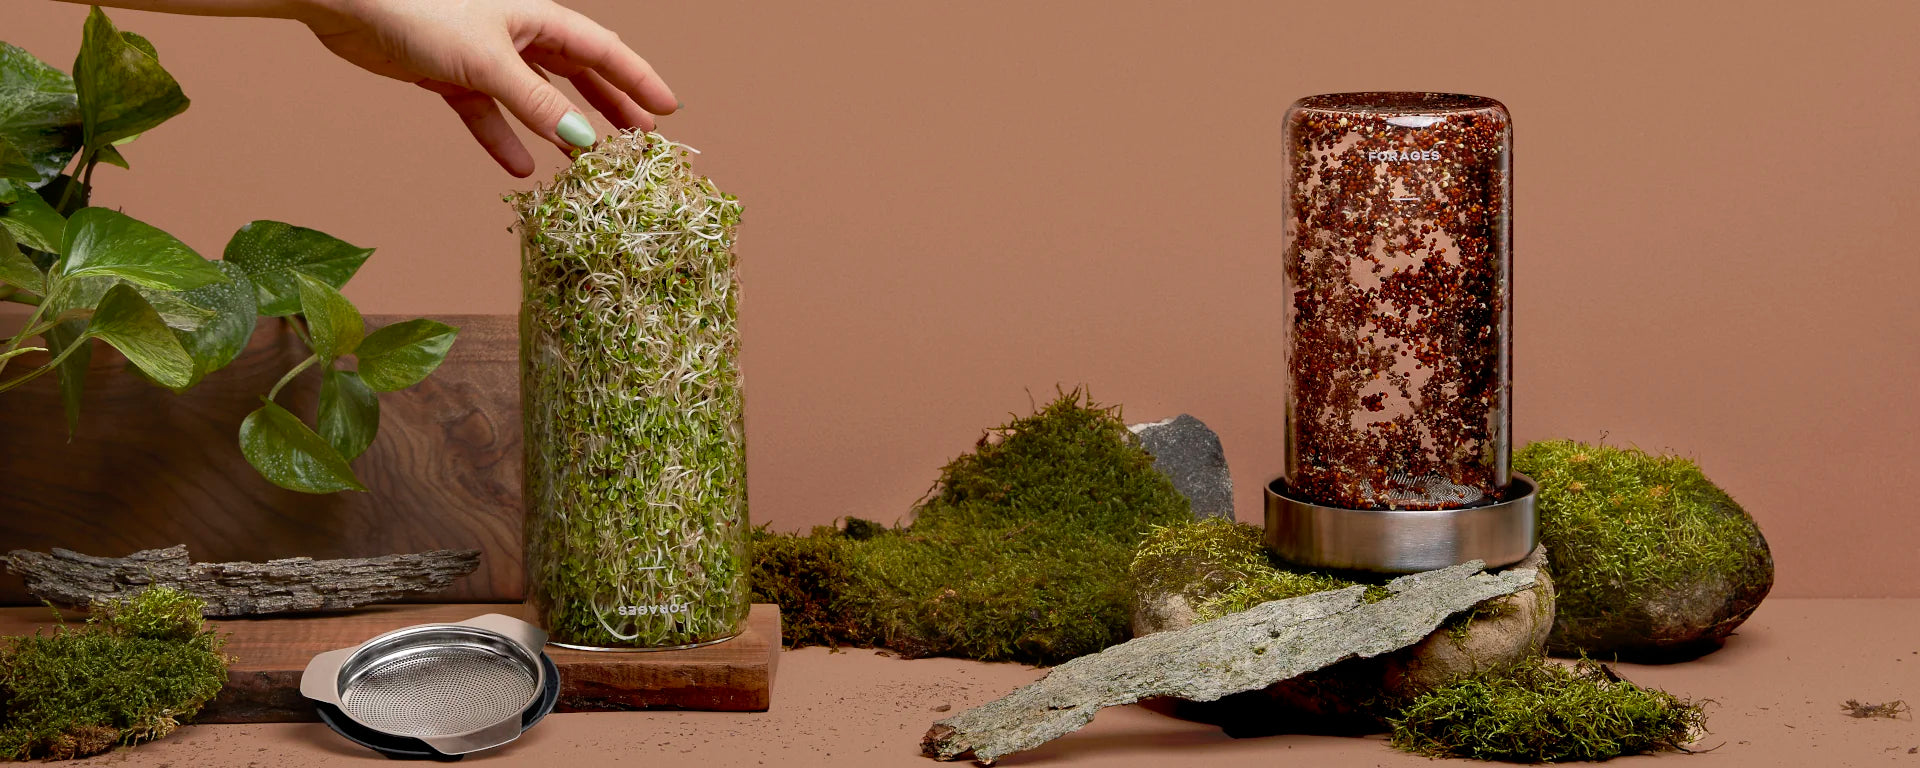 Forages Sprout Jar Kits with rocks, moss, wood and hand reaching banner